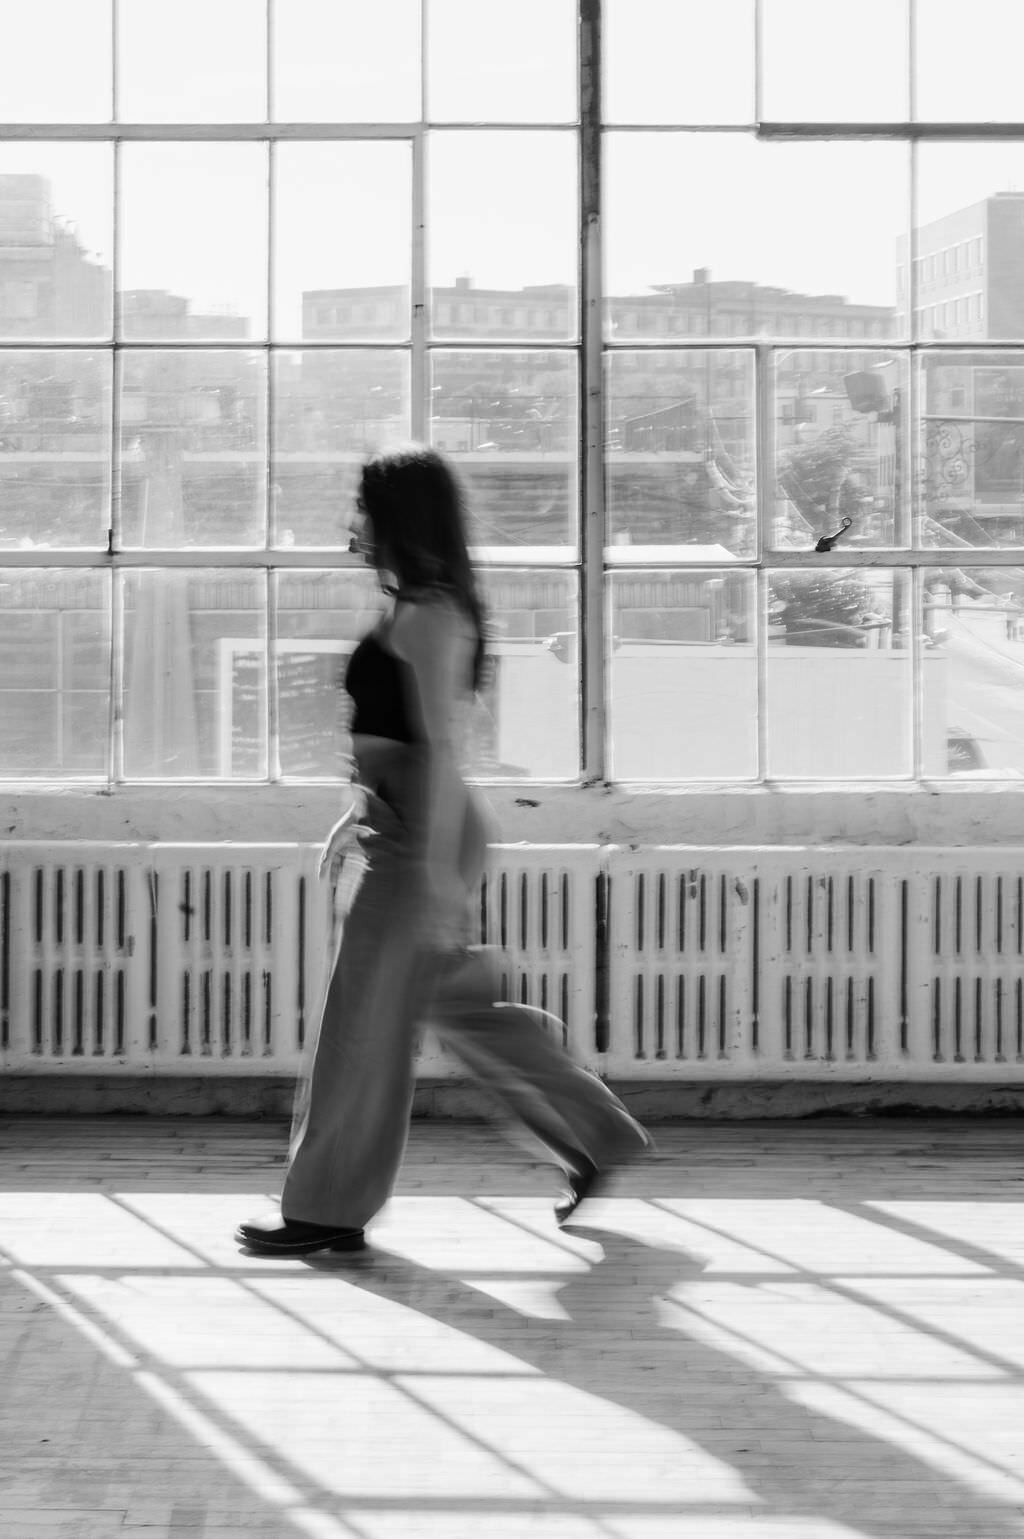 blurred black and white photo of a woman walking along a window